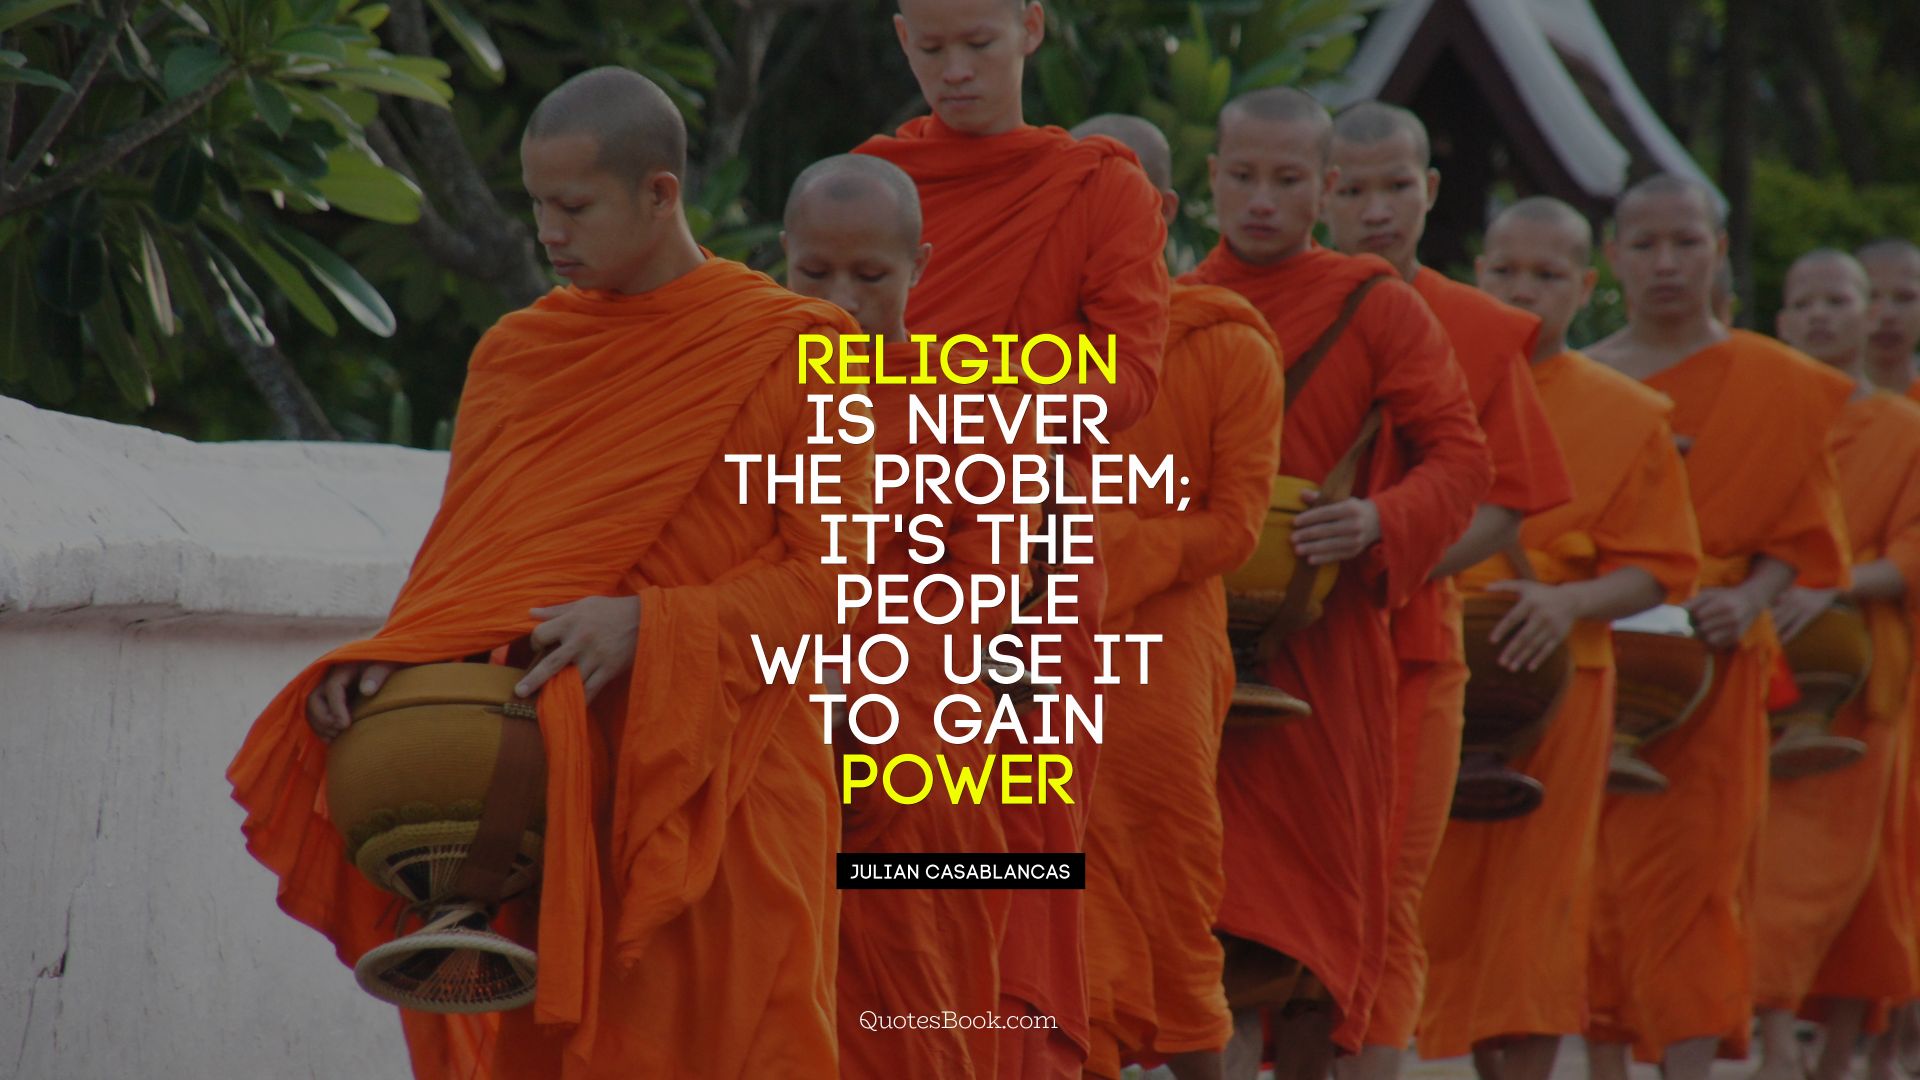 Religion is never the problem; It's the people who use it to gain power. - Quote by Julian Casablancas